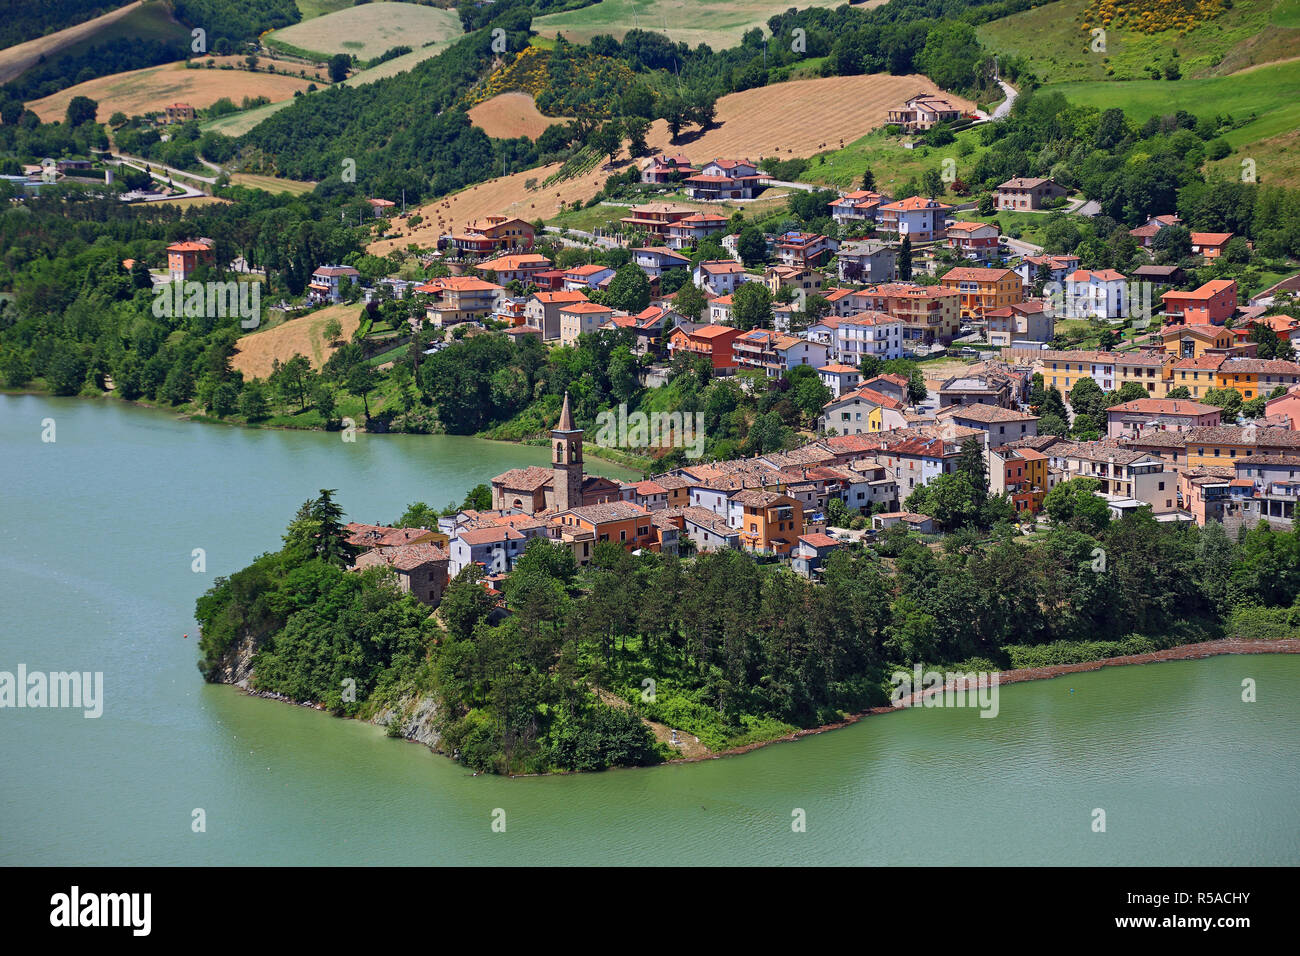 View of the district of Mercatale and the Lago di Mercatale reservoir, Sassocorvaro, Marken, Italy Stock Photo